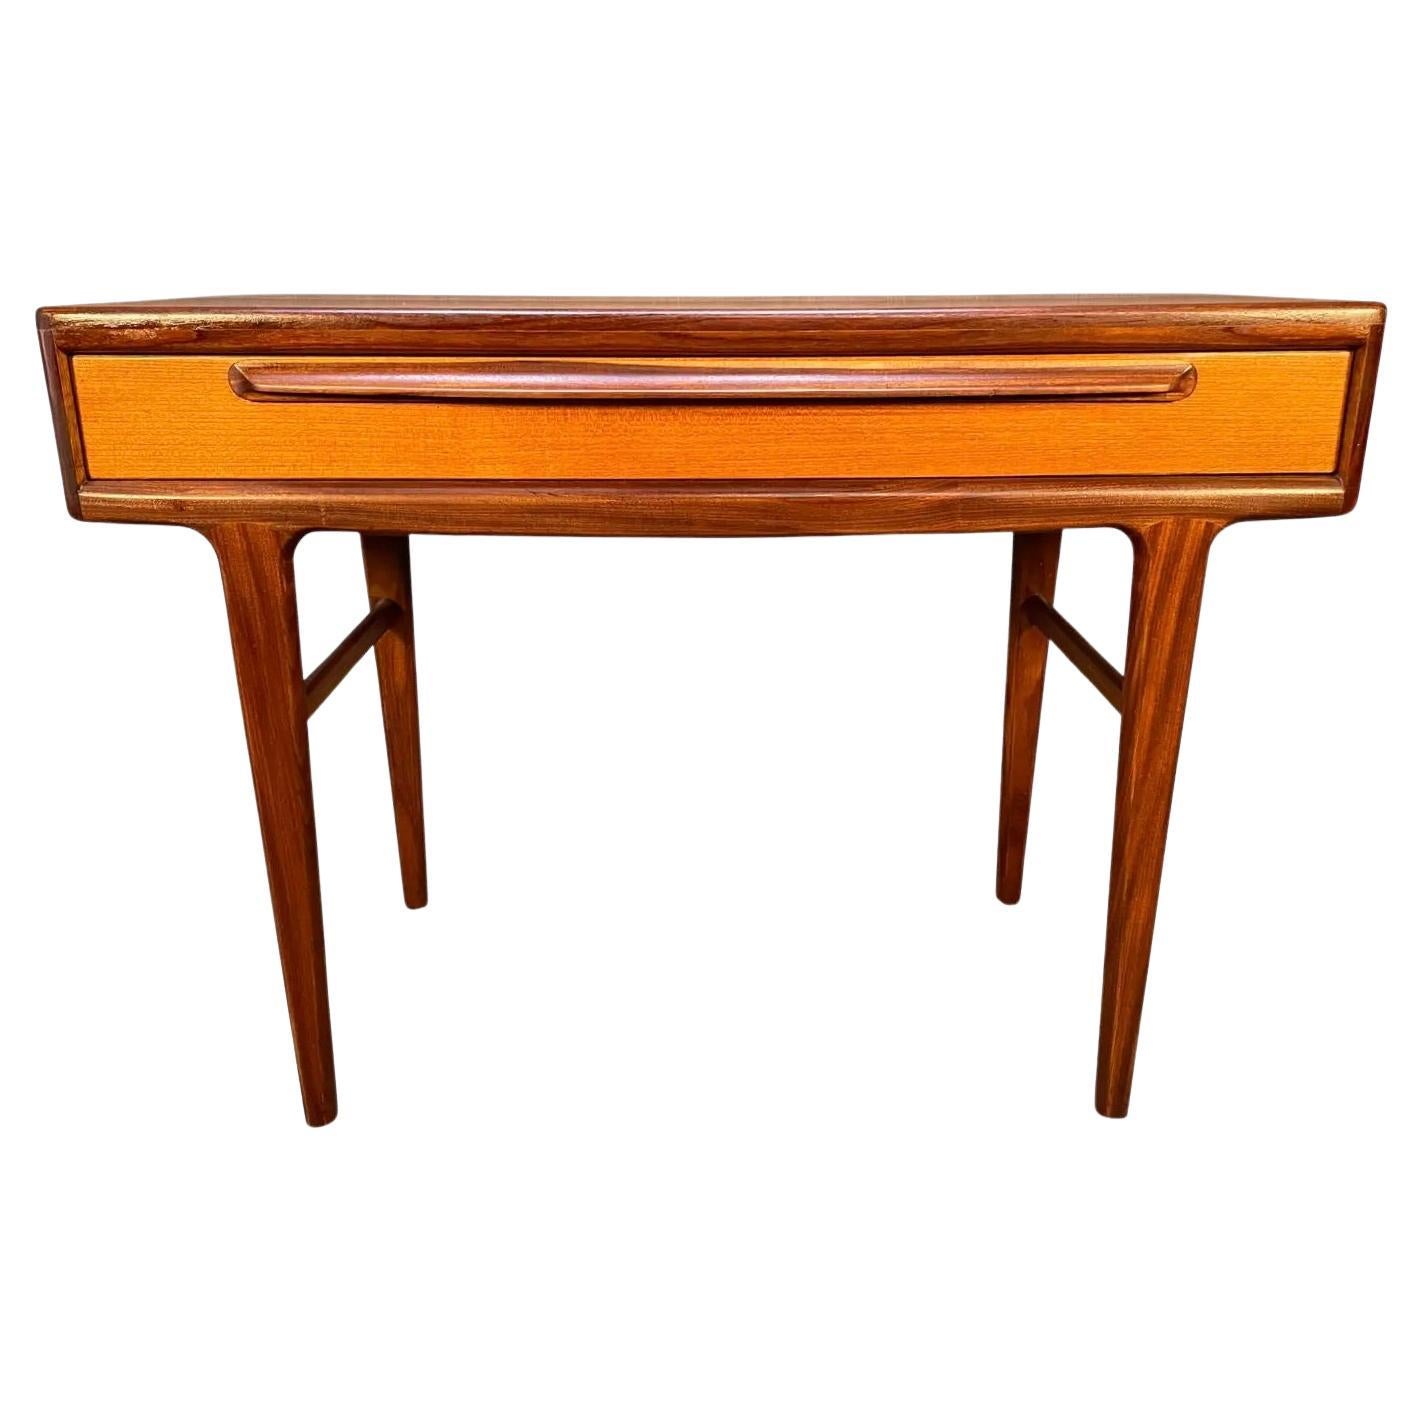 Vintage British Midcentury Teak "Sequence" Entry Way Console Table by Younger